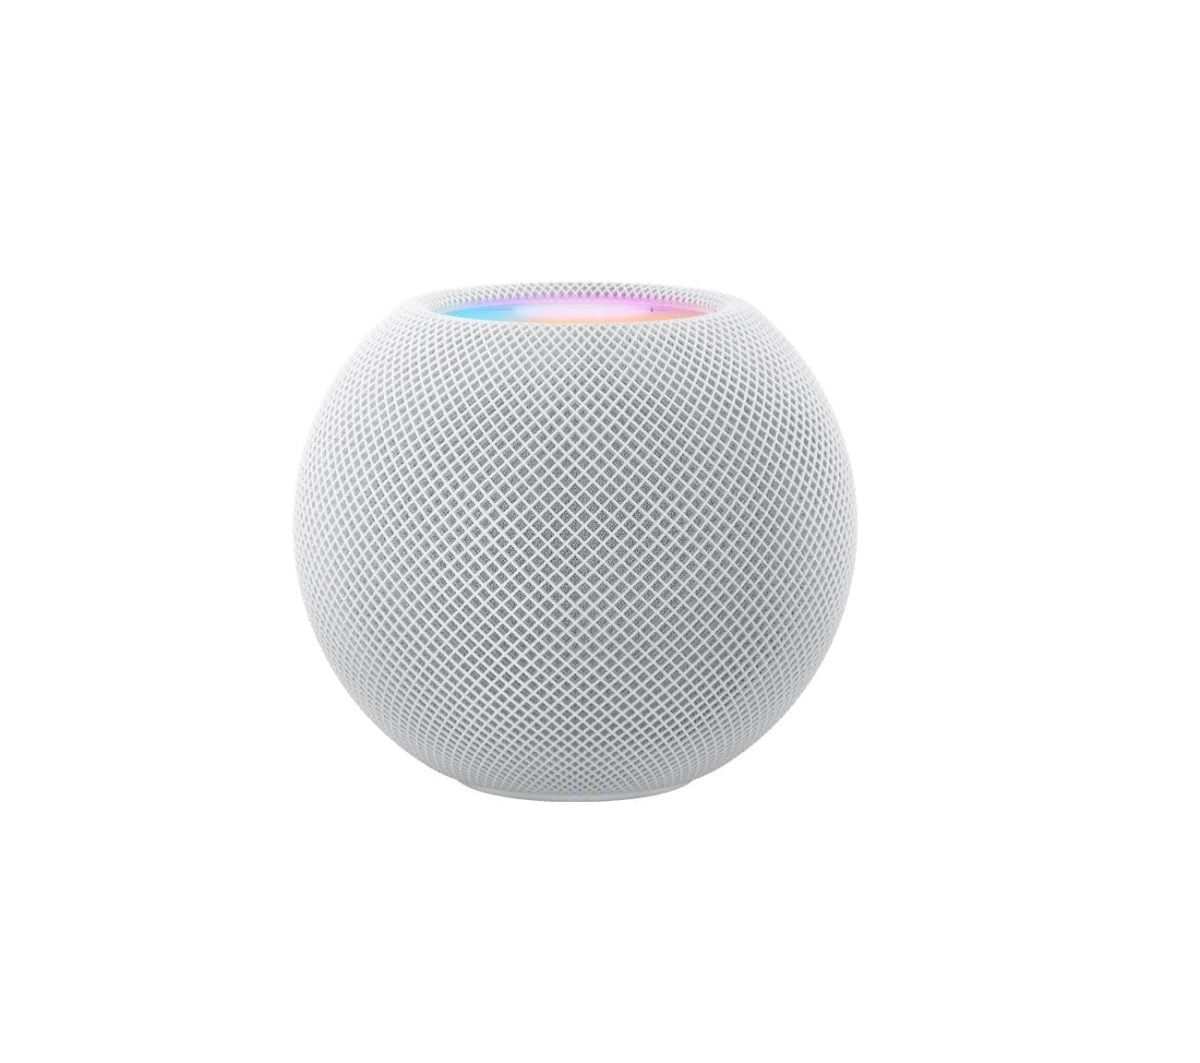 Homepod Mini Select White 202110 Fv1 Apple &Amp;Lt;H1&Amp;Gt;Apple Homepod Mini White&Amp;Lt;/H1&Amp;Gt; Jam-Packed With Innovation, Homepod Mini Fills The Entire Room With Rich 360-Degree Audio. Place Multiple Speakers Around The House For A Connected Sound System. And With Siri, Your Favorite Do-It-All Intelligent Assistant Helps With Everyday Tasks And Controls Your Smart Home Privately And Securely. &Amp;Lt;H2&Amp;Gt;Features:&Amp;Lt;/H2&Amp;Gt; - Fills The Entire Room With Rich 360-Degree Audio - Siri Is Your Do-It-All Intelligent Assistant, Helping With Everyday Tasks - Easily Control Your Smart Home - Designed To Keep Your Data Private And Secure - Place Multiple Homepod Mini Speakers Around The House For A Connected Sound System² - Intercom Messages To Every Room³ - Pair Two Homepod Mini Speakers Together For Immersive Stereo Sound - Voice Recognition Gives Each Family Member A Personalized Experience⁴ - Seamlessly Hand-Off Audio By Bringing Your Iphone Close To Homepod Setup Requires Wi-Fi And Iphone, Ipad, Or Ipod Touch With The Latest Software. &Amp;Lt;Pre&Amp;Gt;One Year International Apple Warranty&Amp;Lt;/Pre&Amp;Gt; Homepod Mini Apple Homepod Mini White